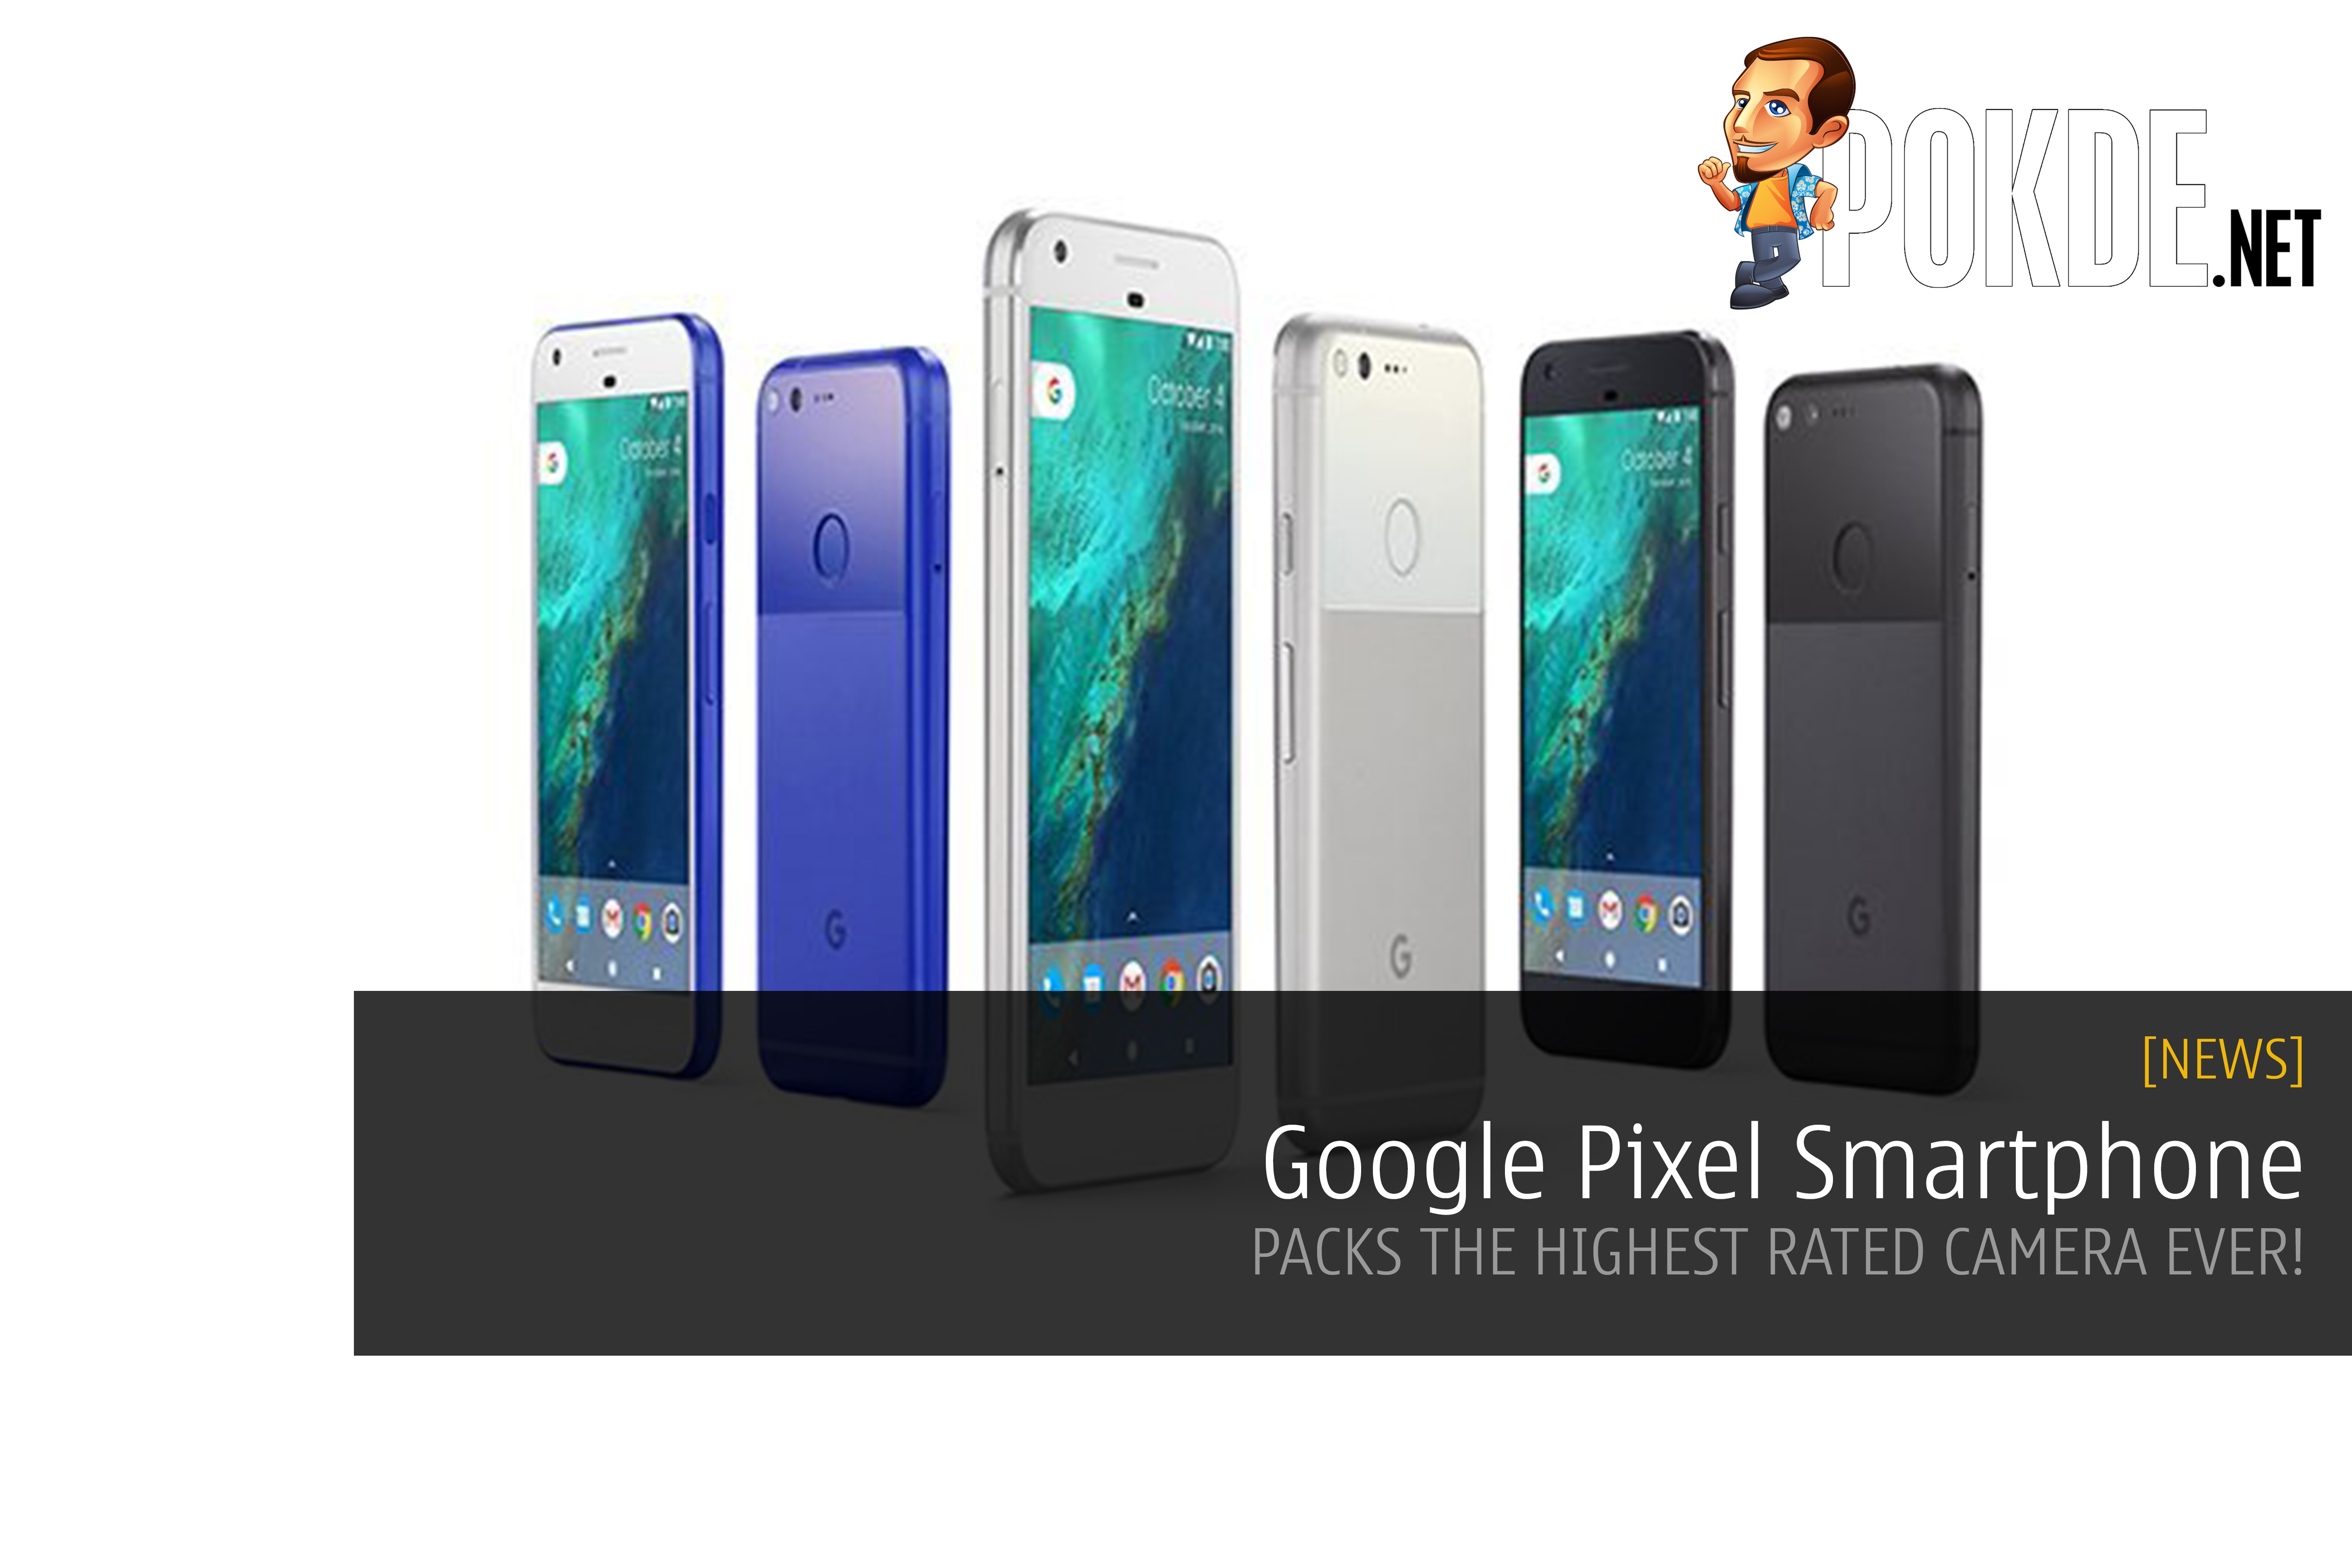 Google Pixel smartphone "made by Google" packs the highest rated camera ever 29